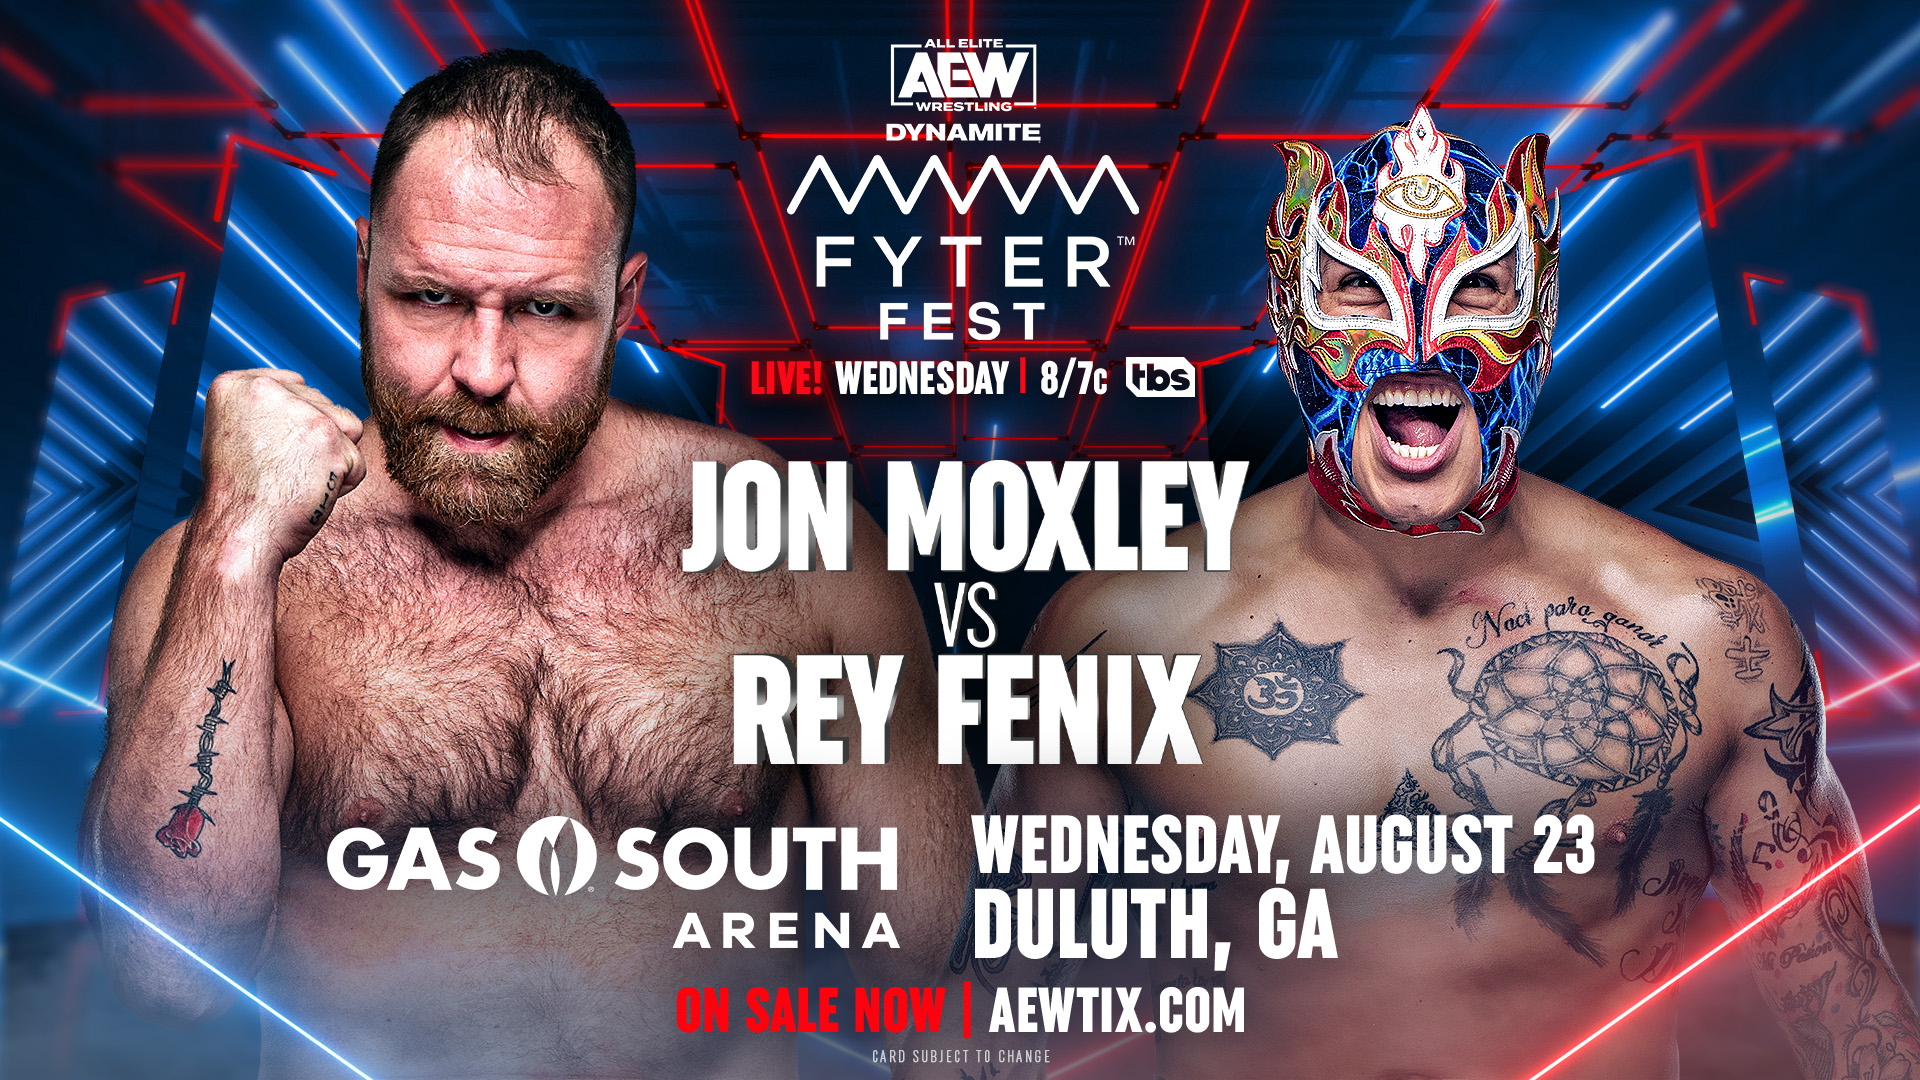 AEW Dynamite - Fyter Fest 2023 match graphic featuring Jon Moxley and Rey Fenix.